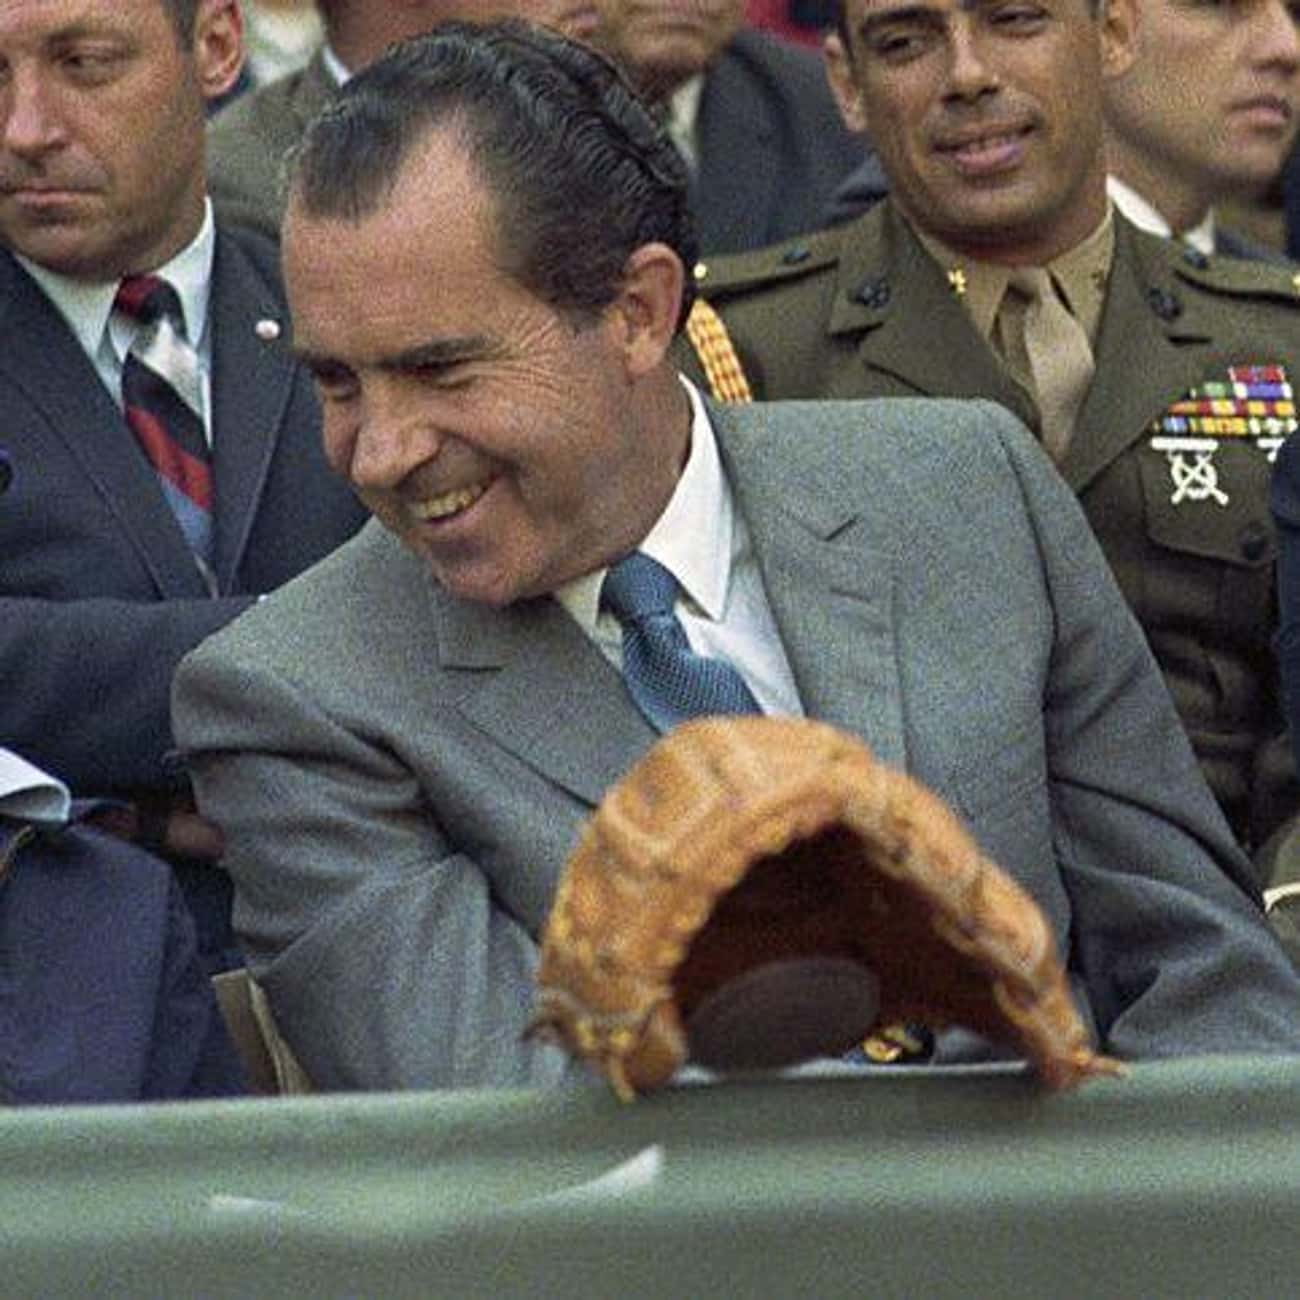 Drunk Nixon Liked To Rock Out To Movie Soundtracks And The Sound Of His Own Voice